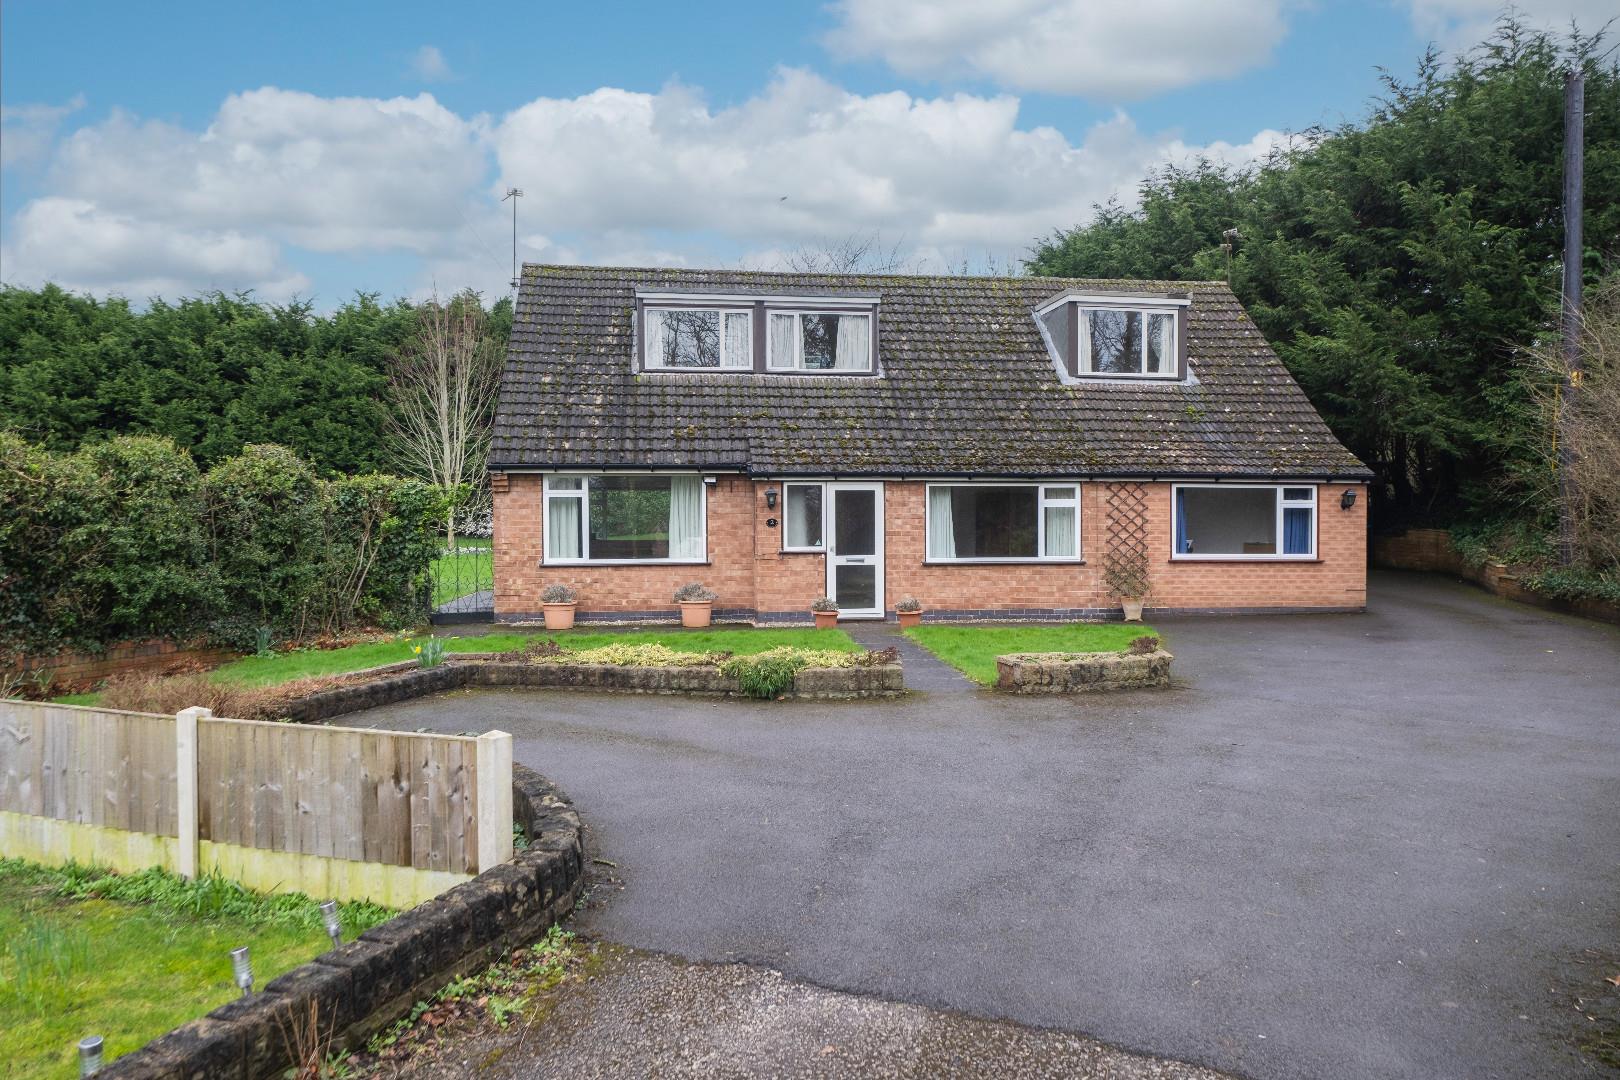 4 bedroom  Bungalow for Sale in Northwich